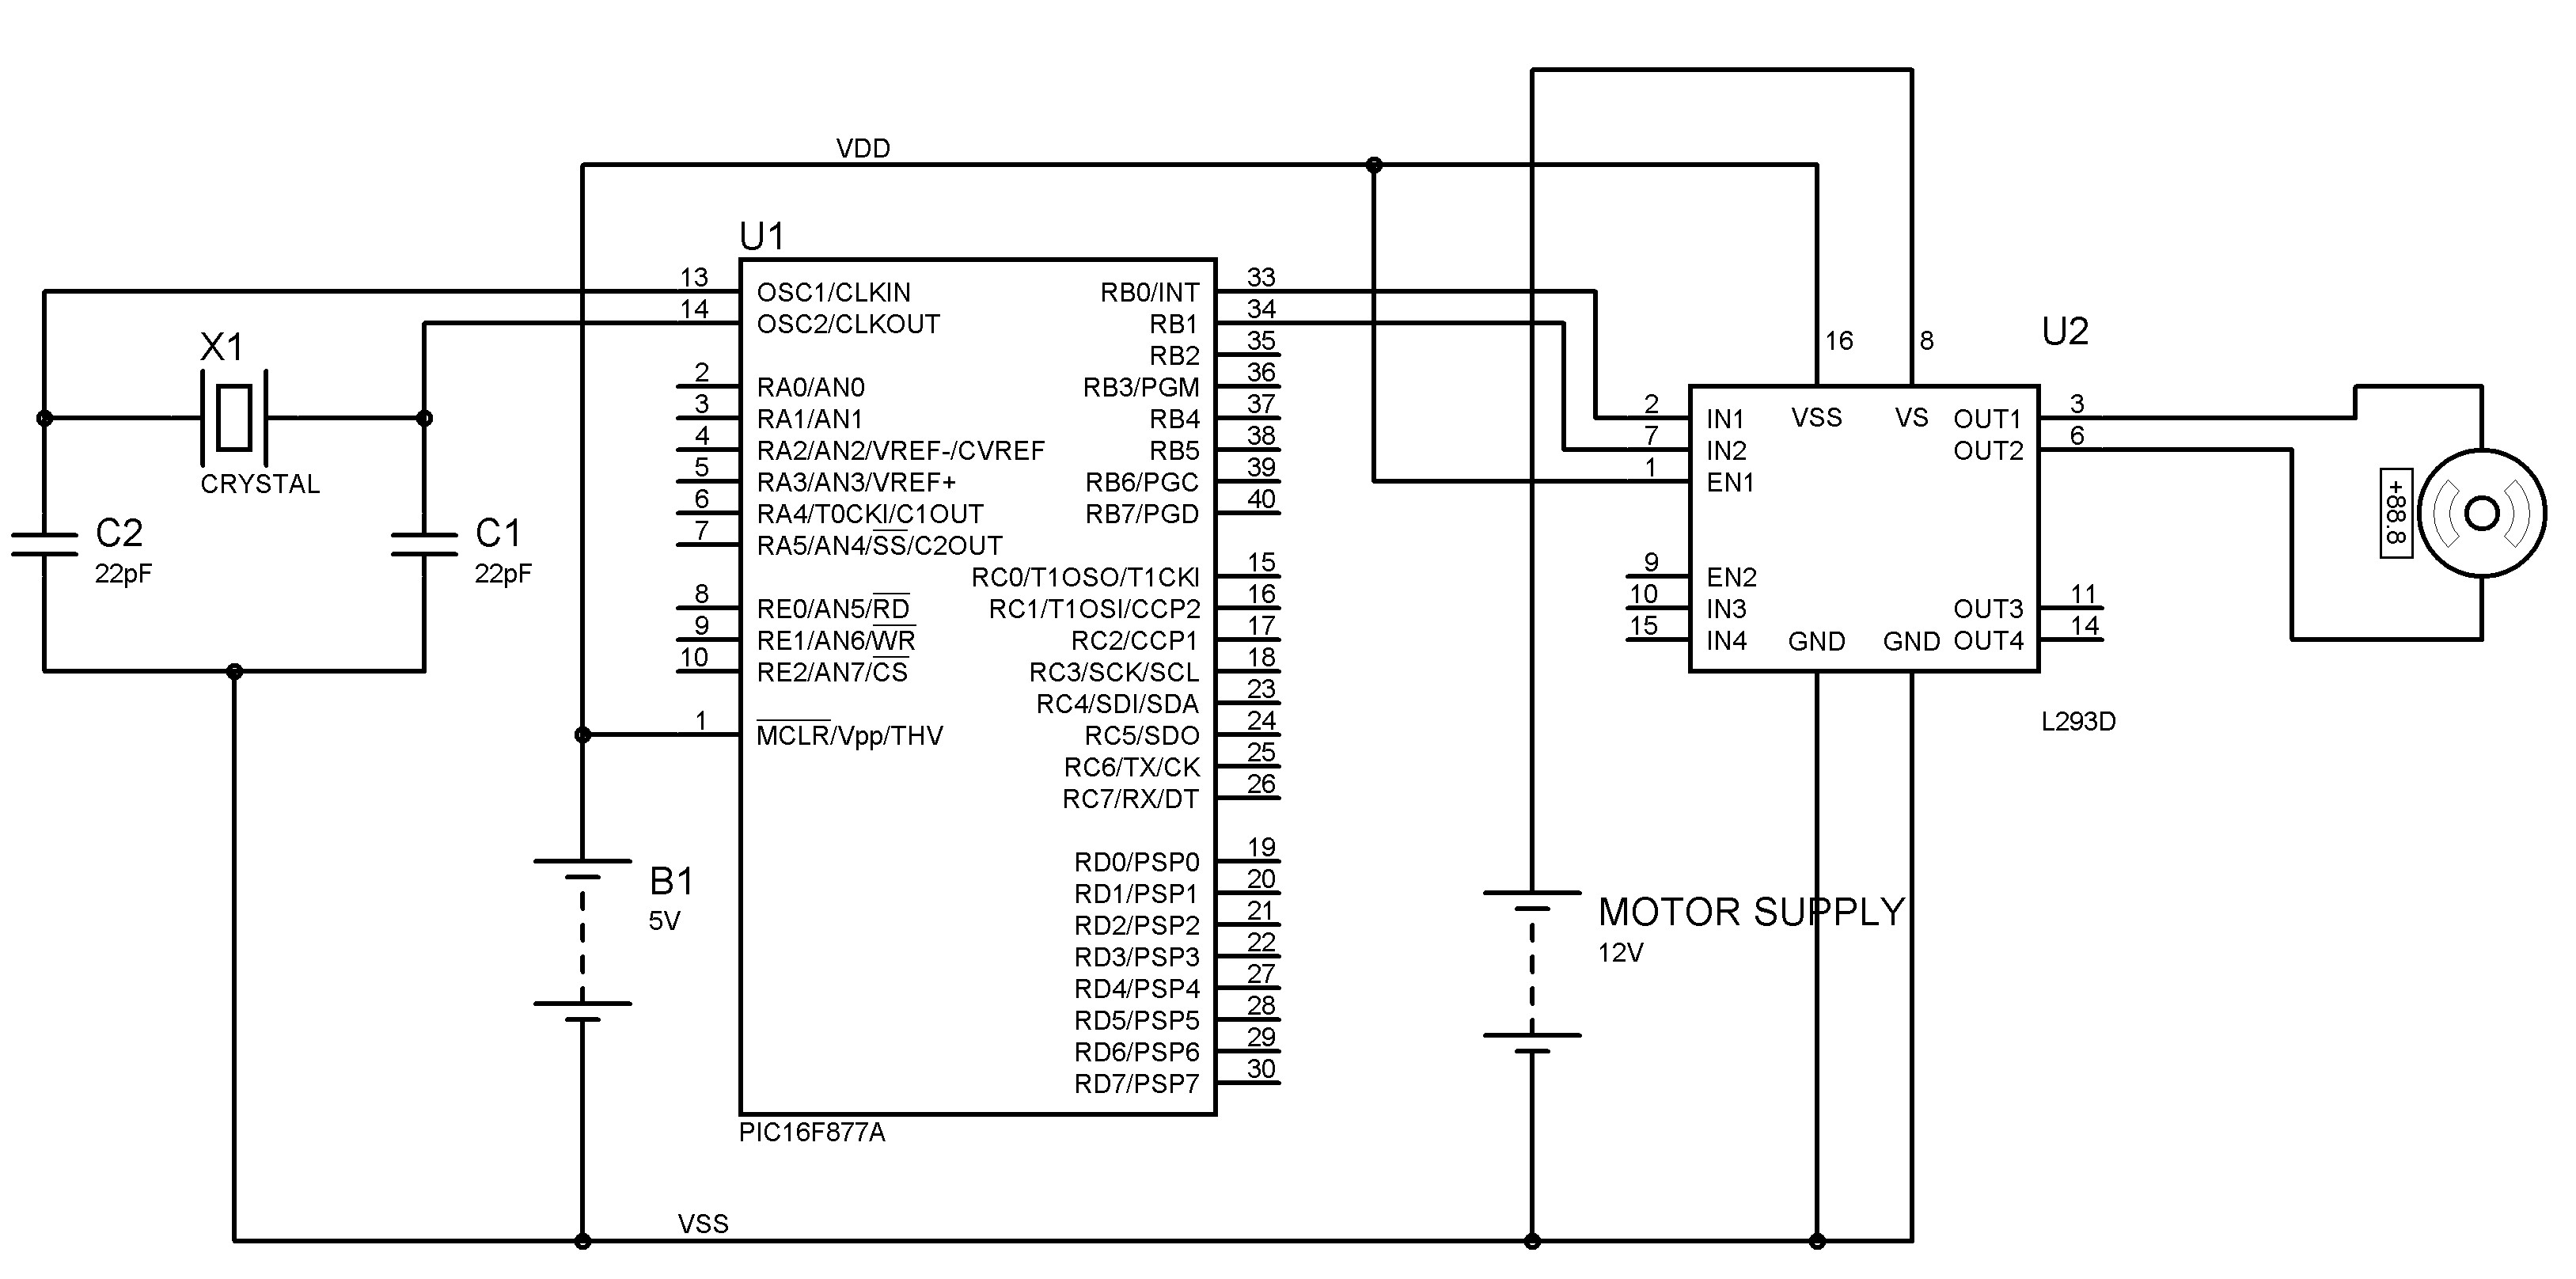 dc motor wiring diagram 4 wire Collection Interfacing DC Motor with PIC Microcontroller and L293D